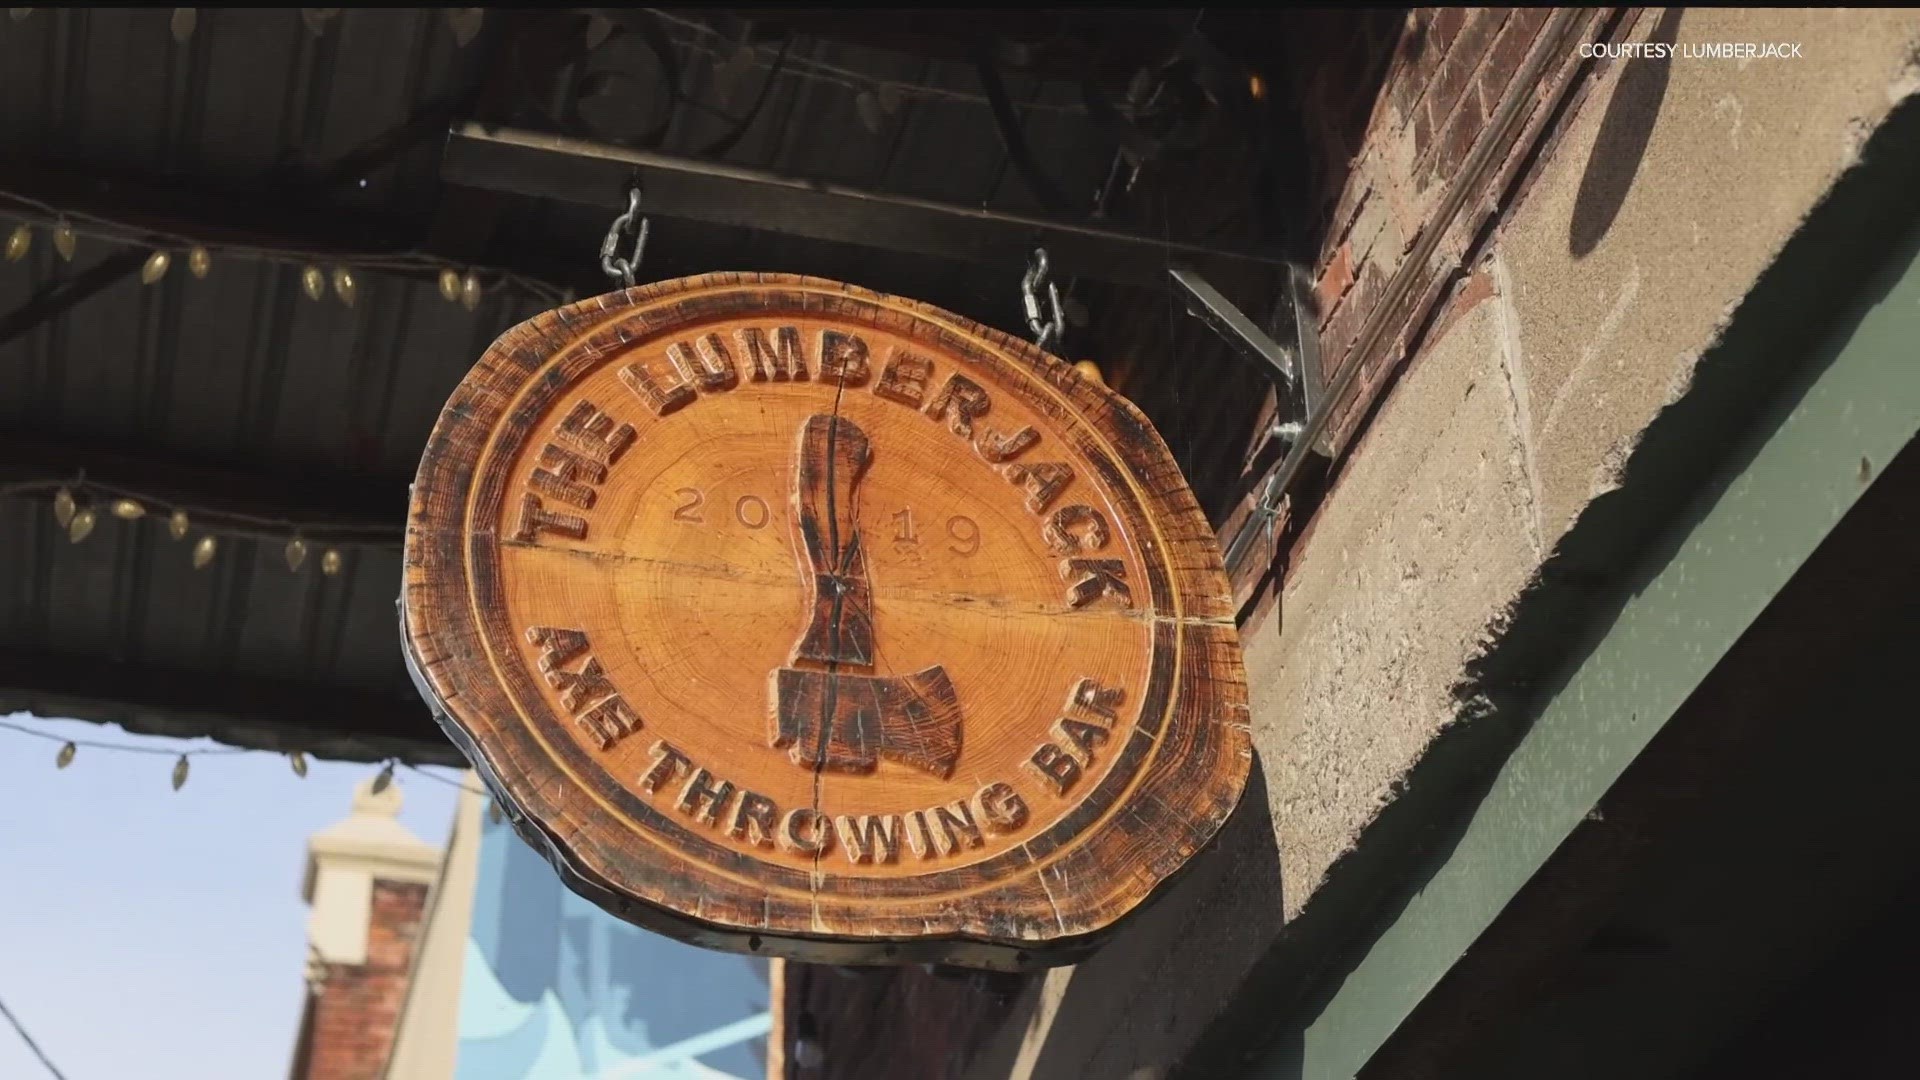 The Lumberjack is not your typical axe-throwing bar.